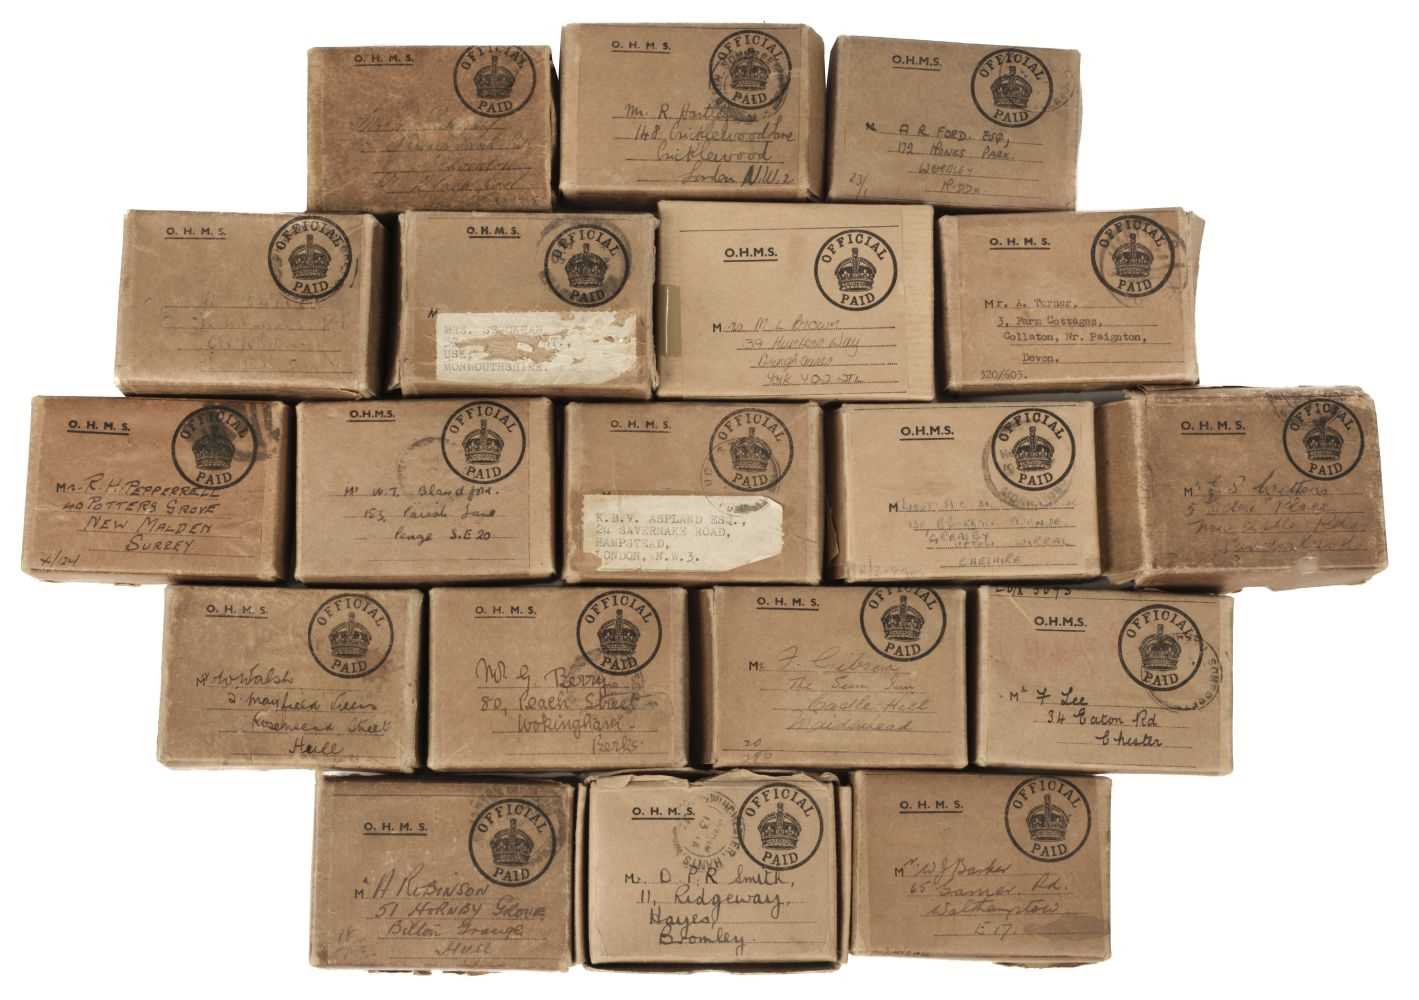 Lot 288 - Medal Boxes. A collection of WWII medal boxes